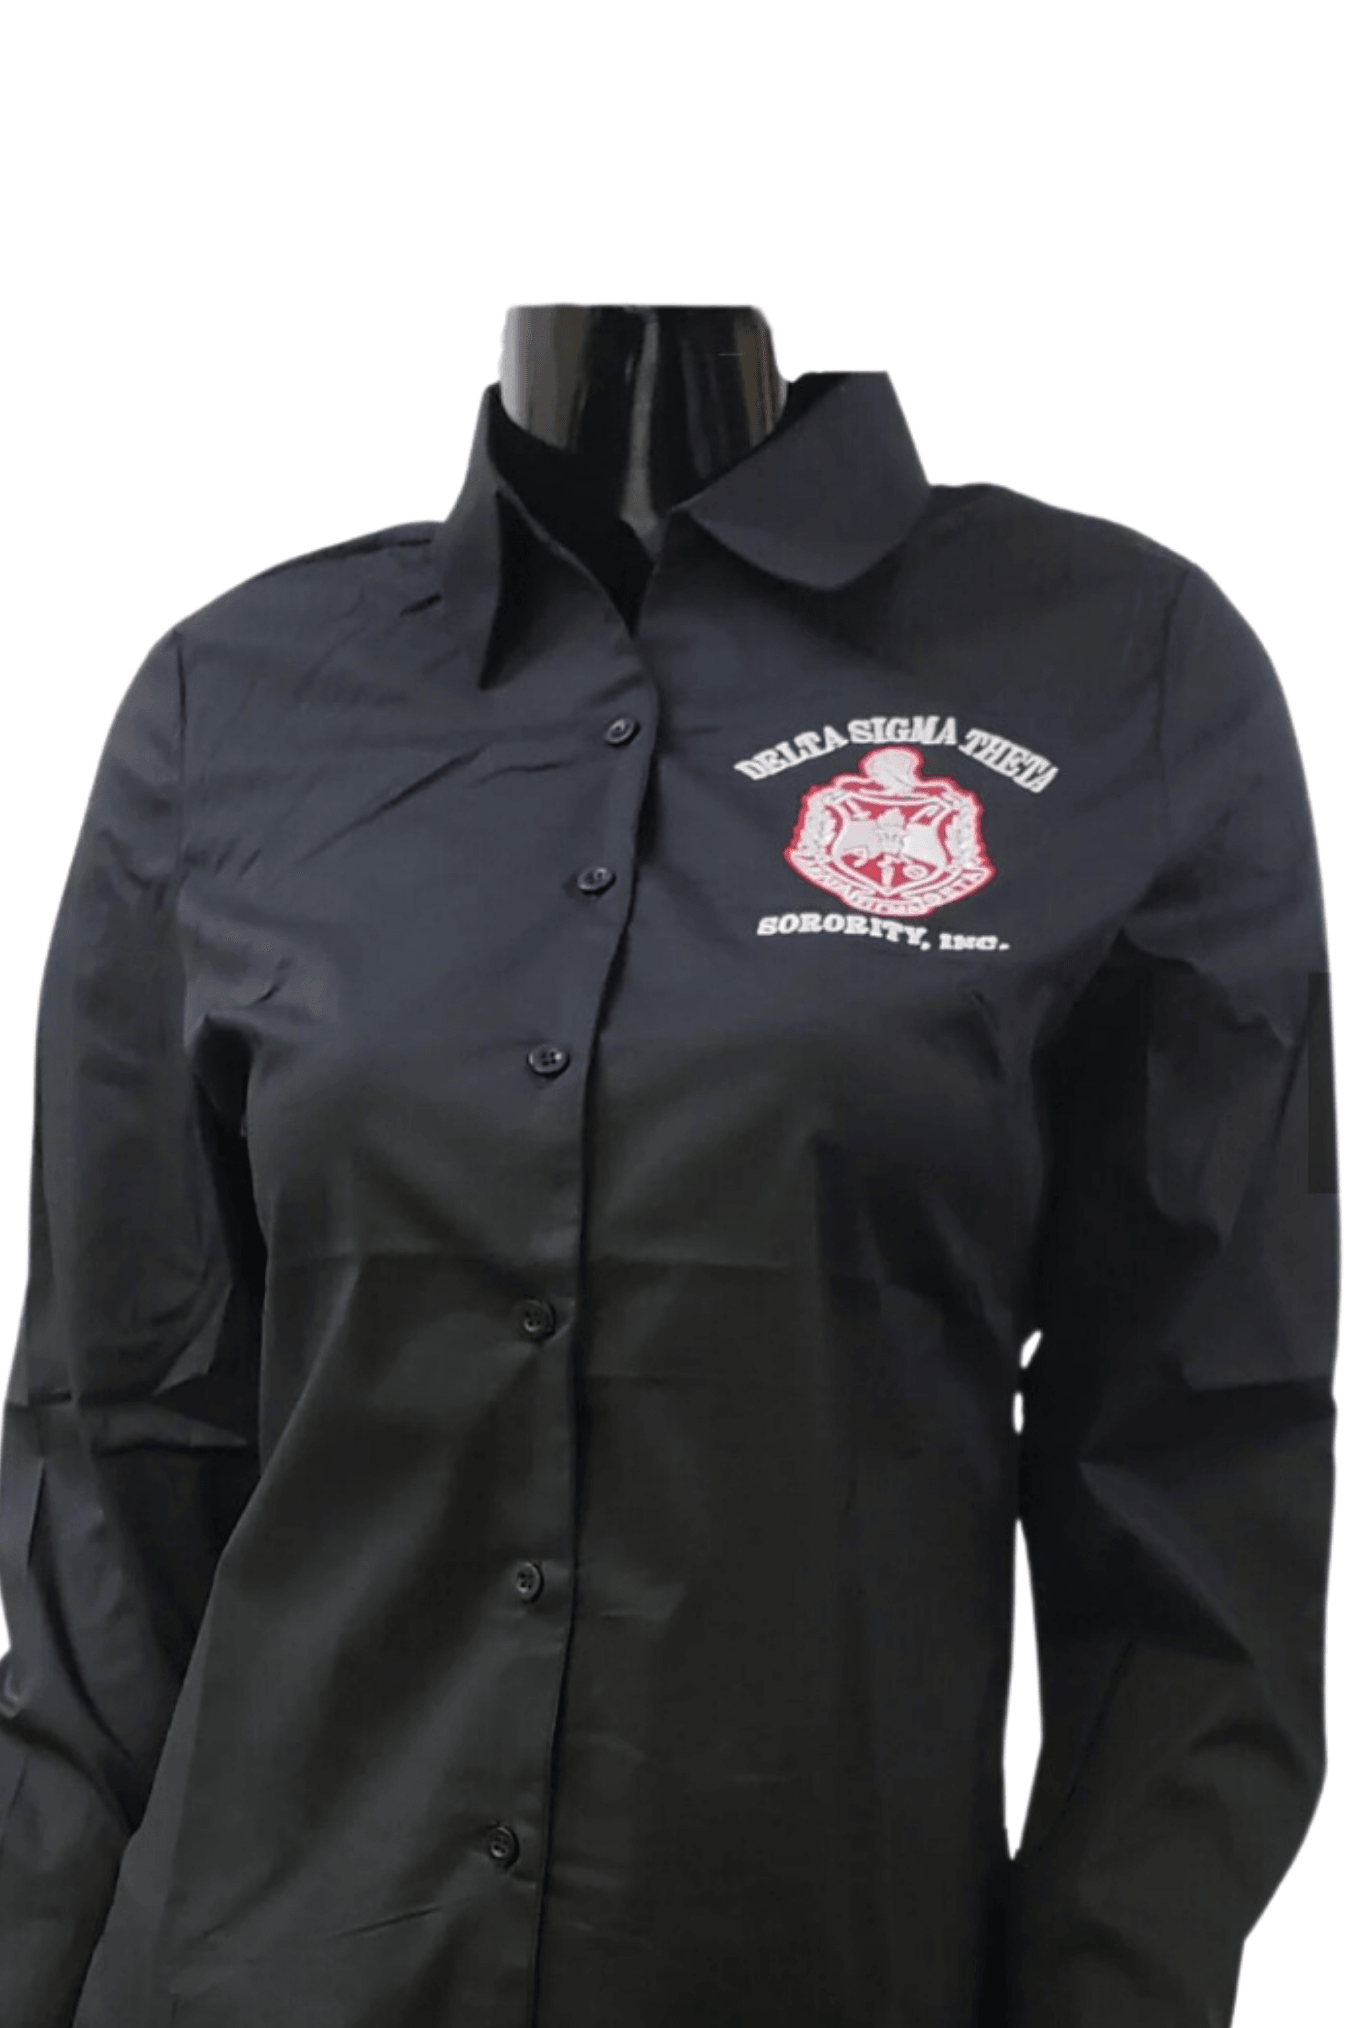 Delta Sigma Theta Sorority, Inc. button down collar shirt with Sorority Crest. Offered in Black or Red